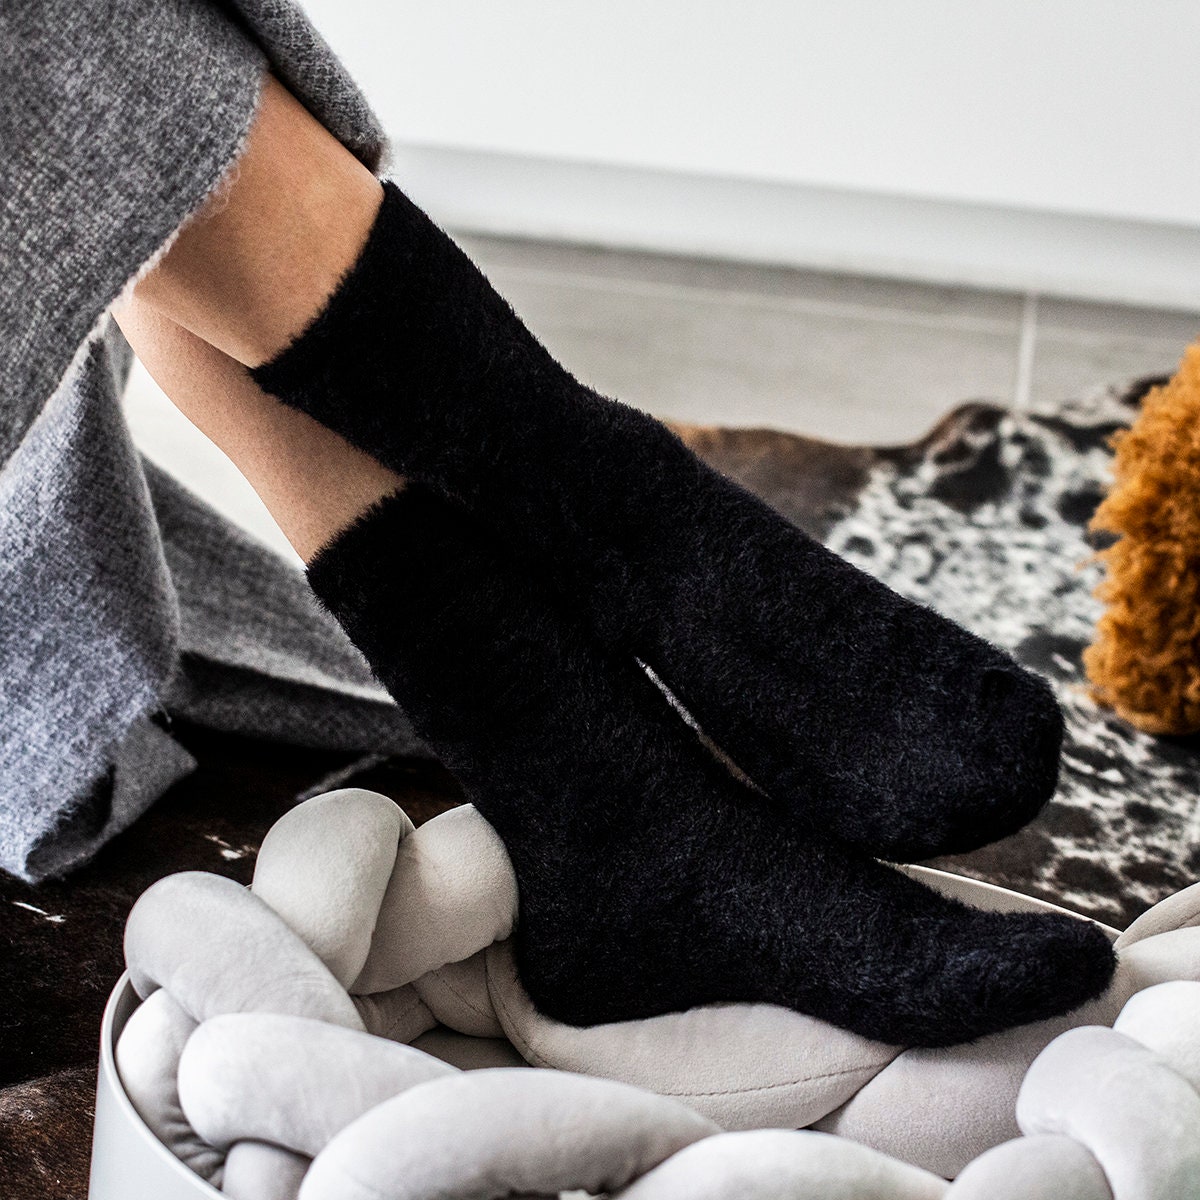 Treatment behind deep Fuzzy Knitted Cosy Bed Socks - Etsy